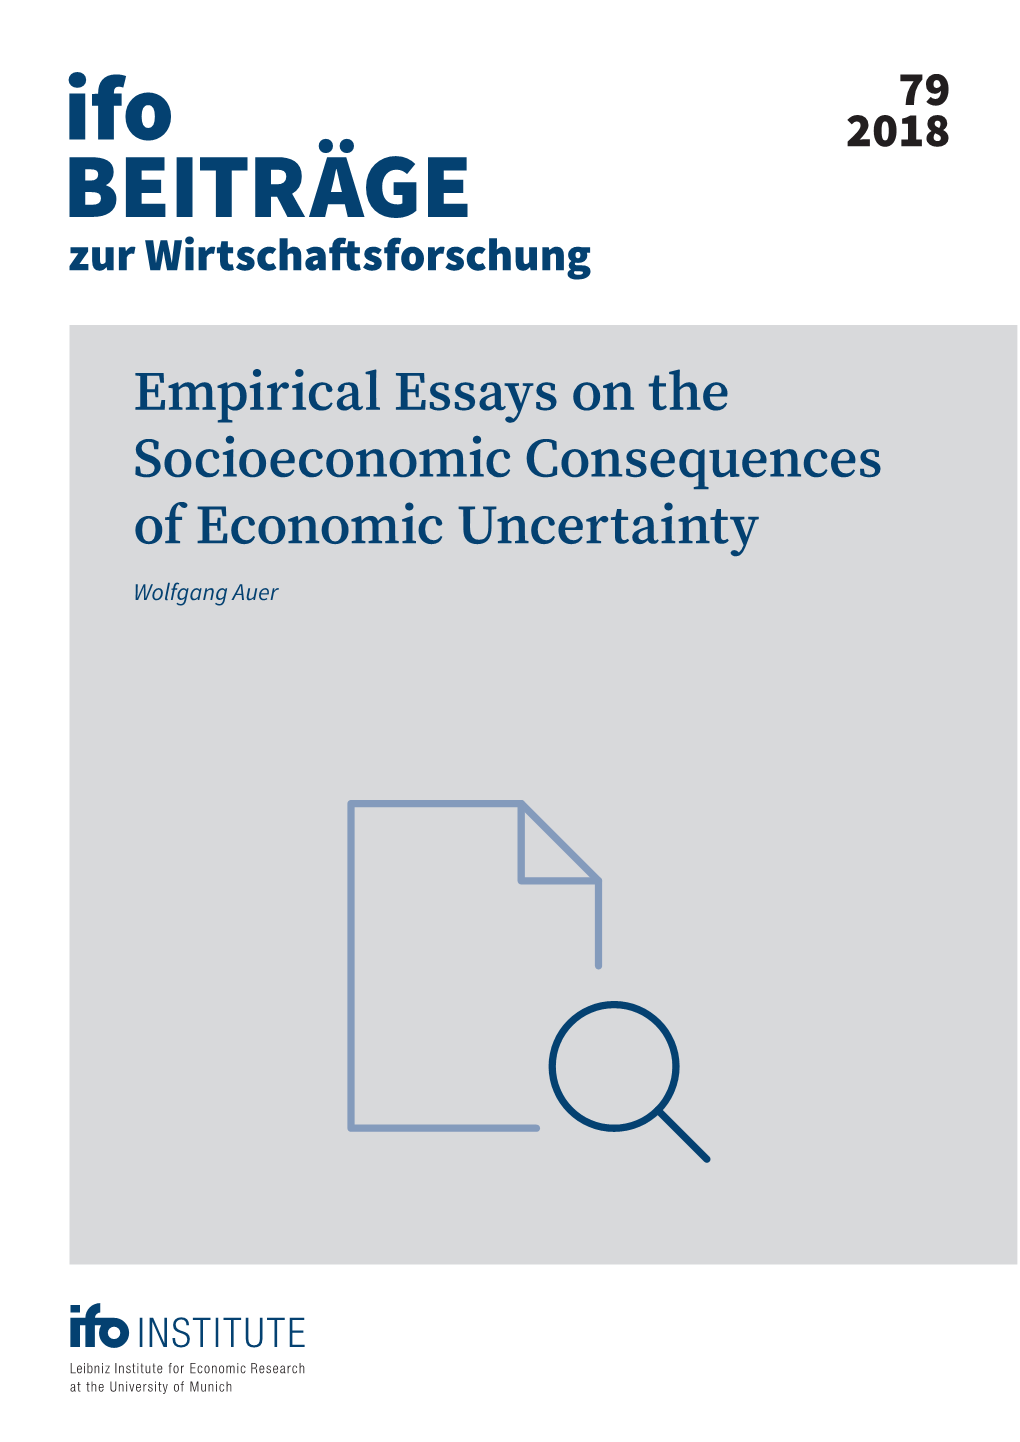 Empirical Essays on the Socioeconomic Consequences of Economic Uncertainty Wolfgang Auer